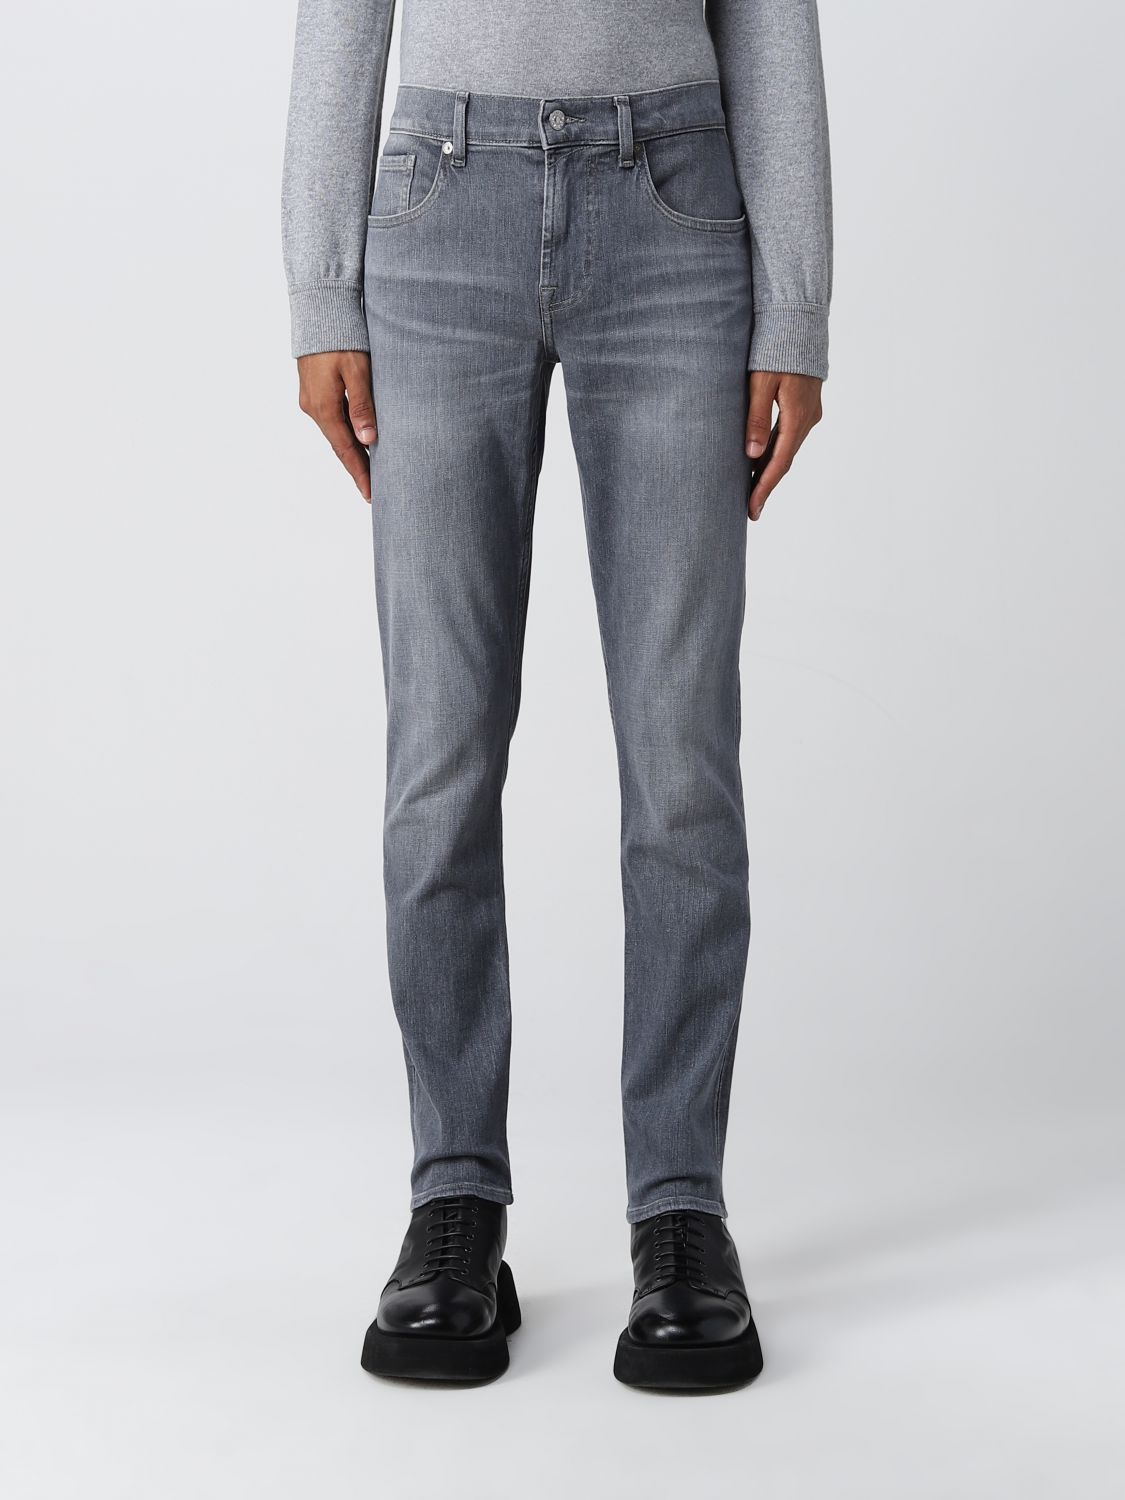 7 FOR ALL MANKIND: jeans for man - Grey | 7 For All Mankind jeans ...